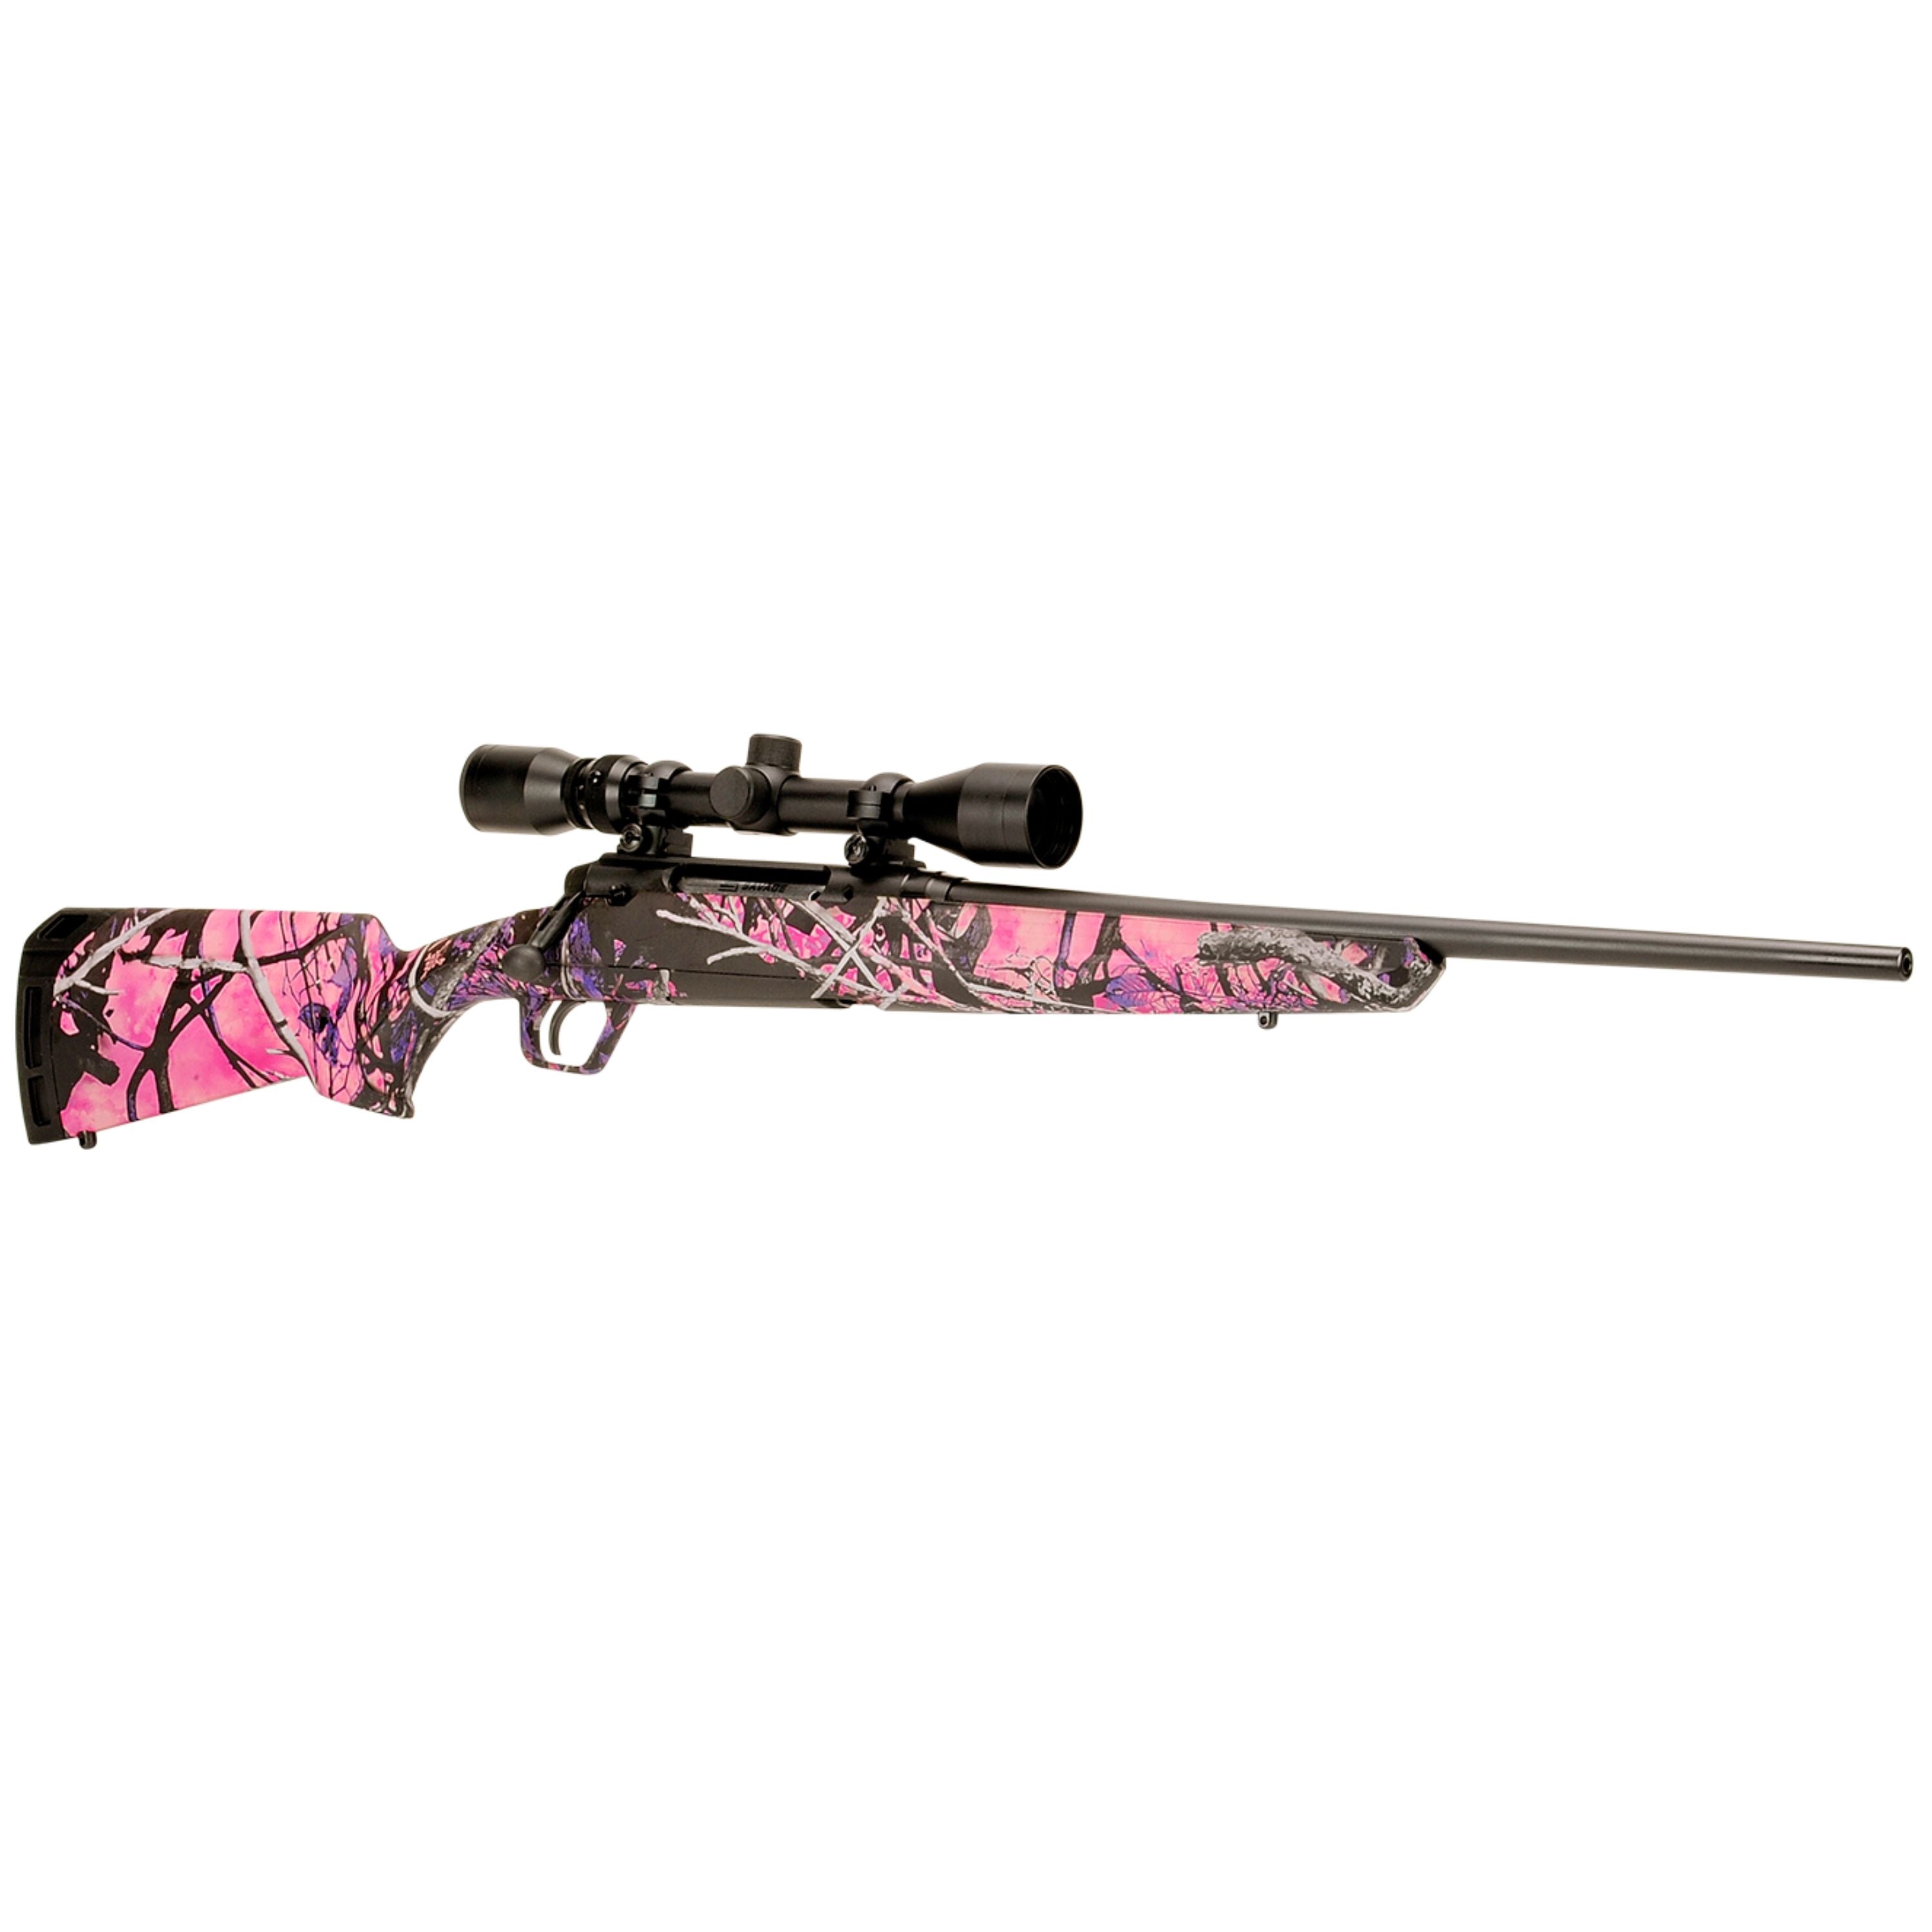 "AXIS XP Compact Muddy Girl" cal. 7mm-08 REM bolt action rifle with scope